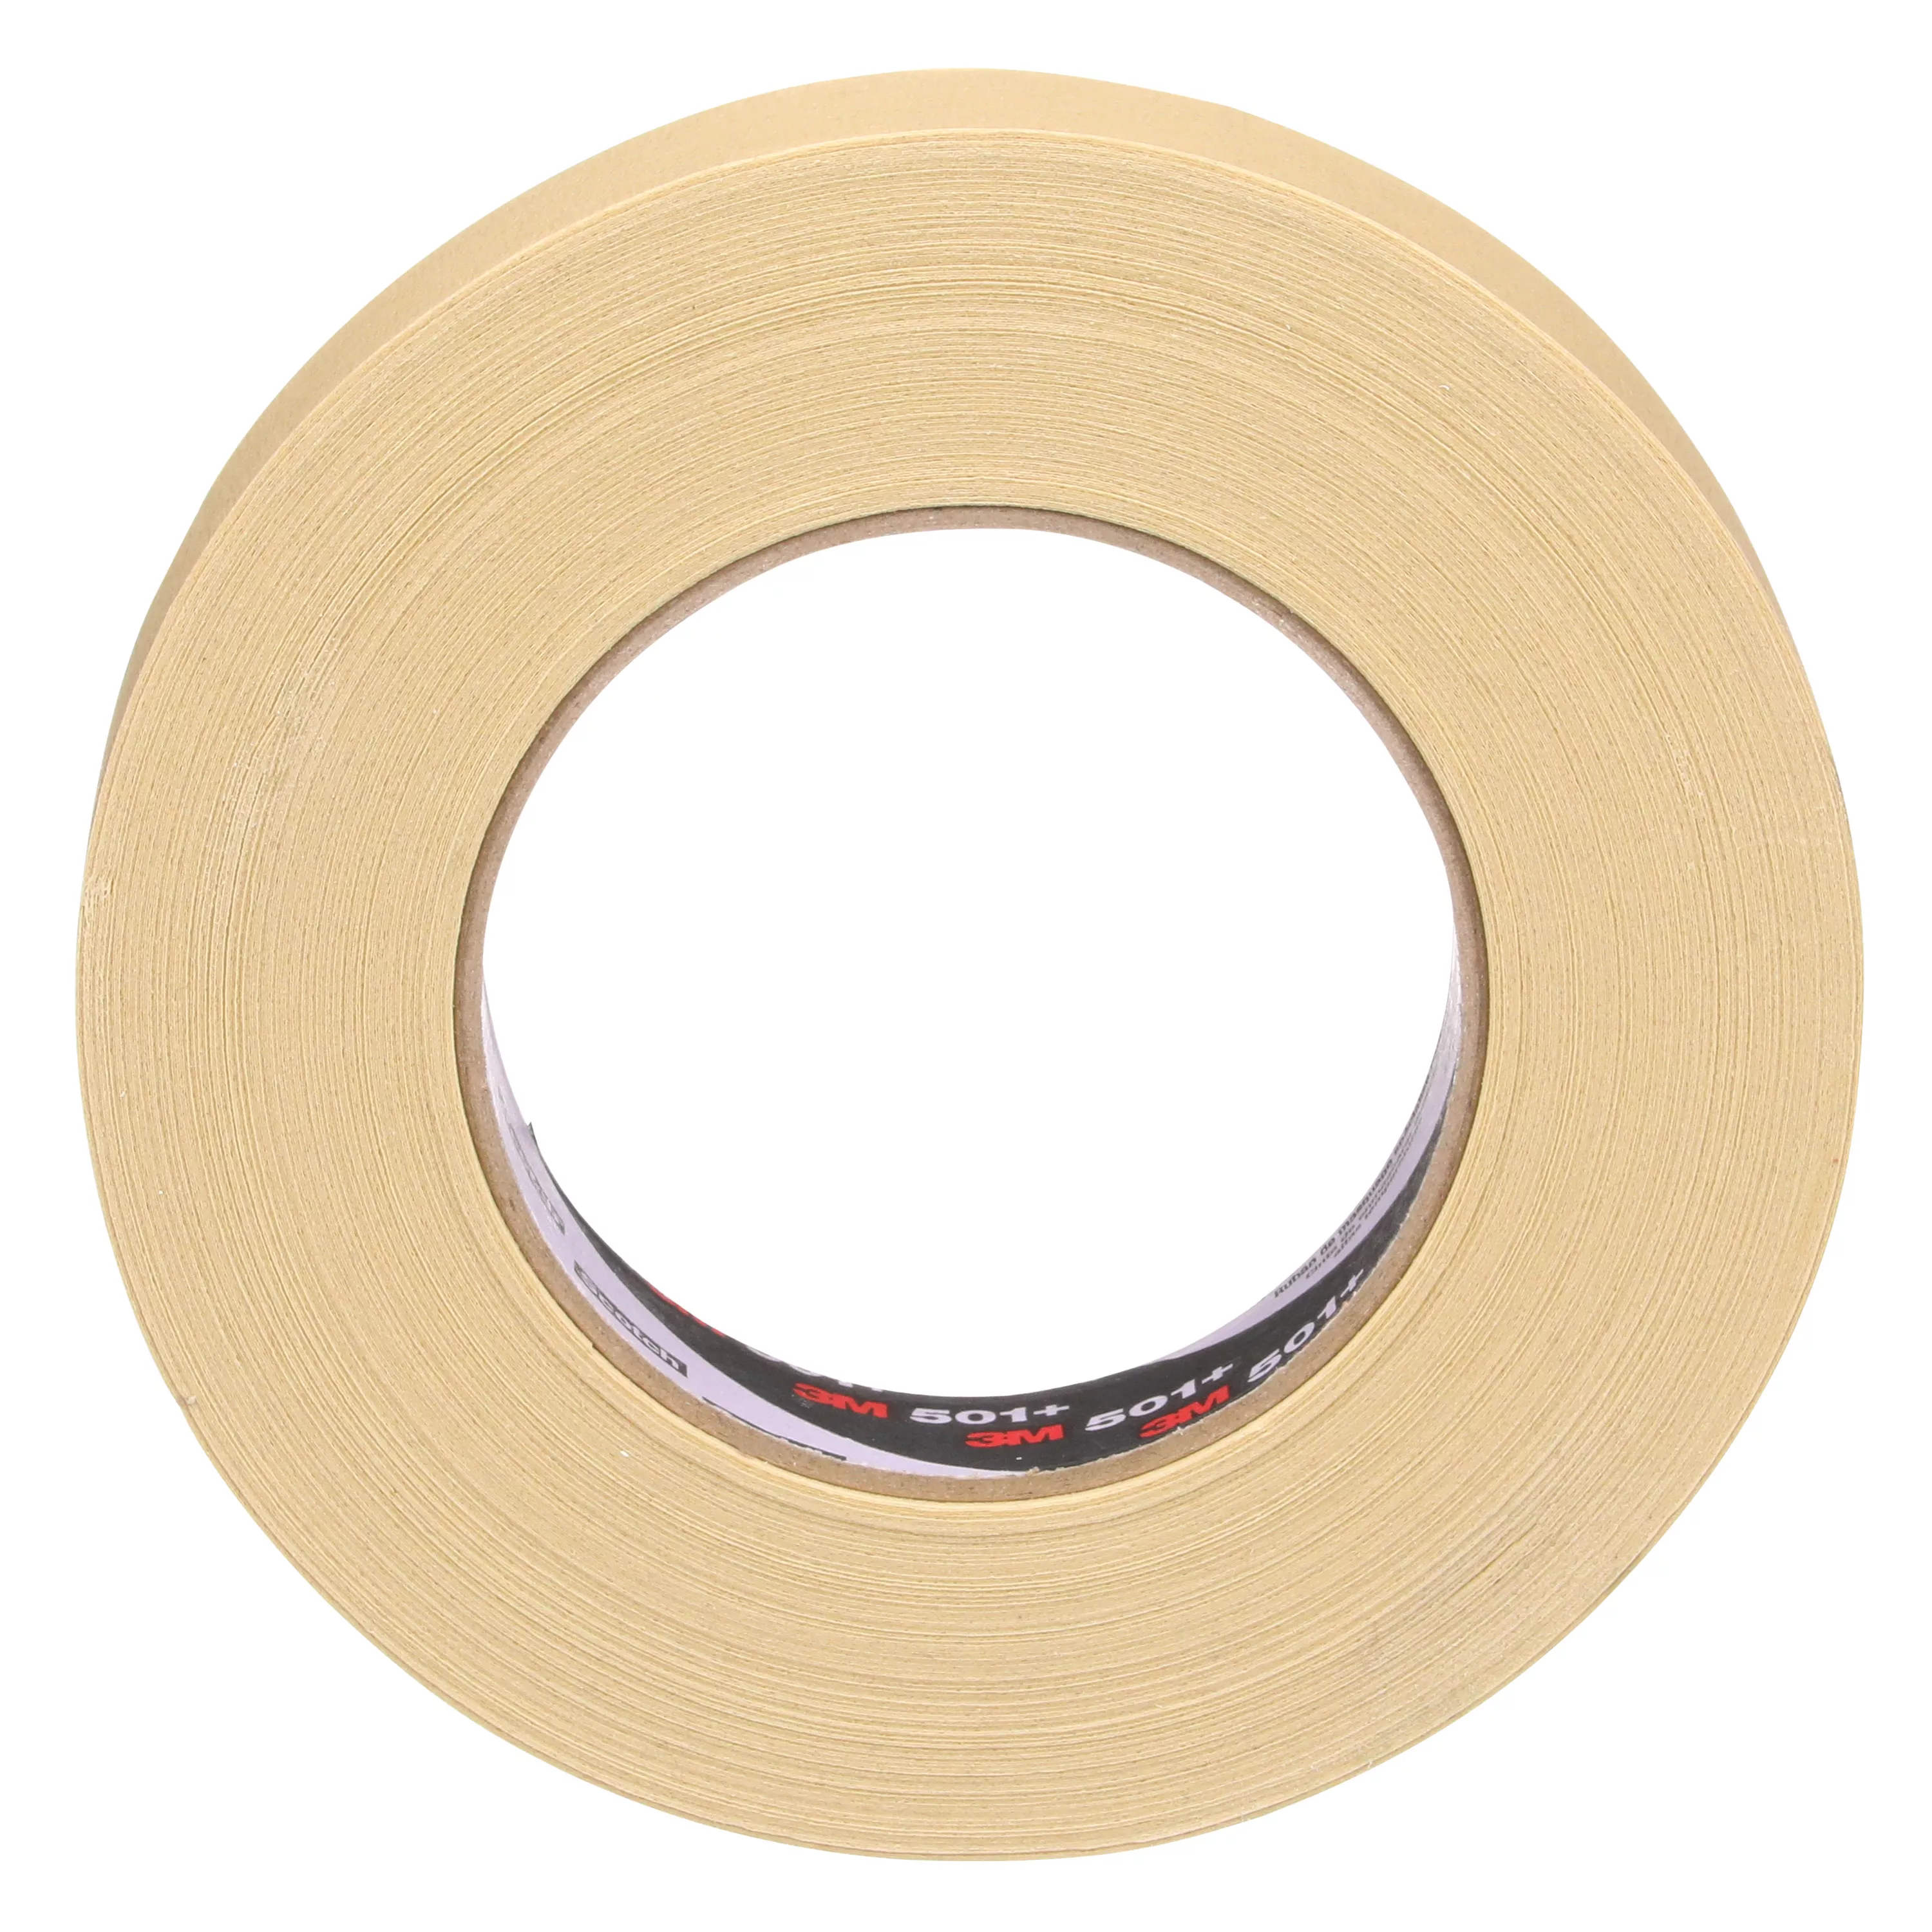 SKU 7000138486 | 3M™ Specialty High Temperature Masking Tape 501+